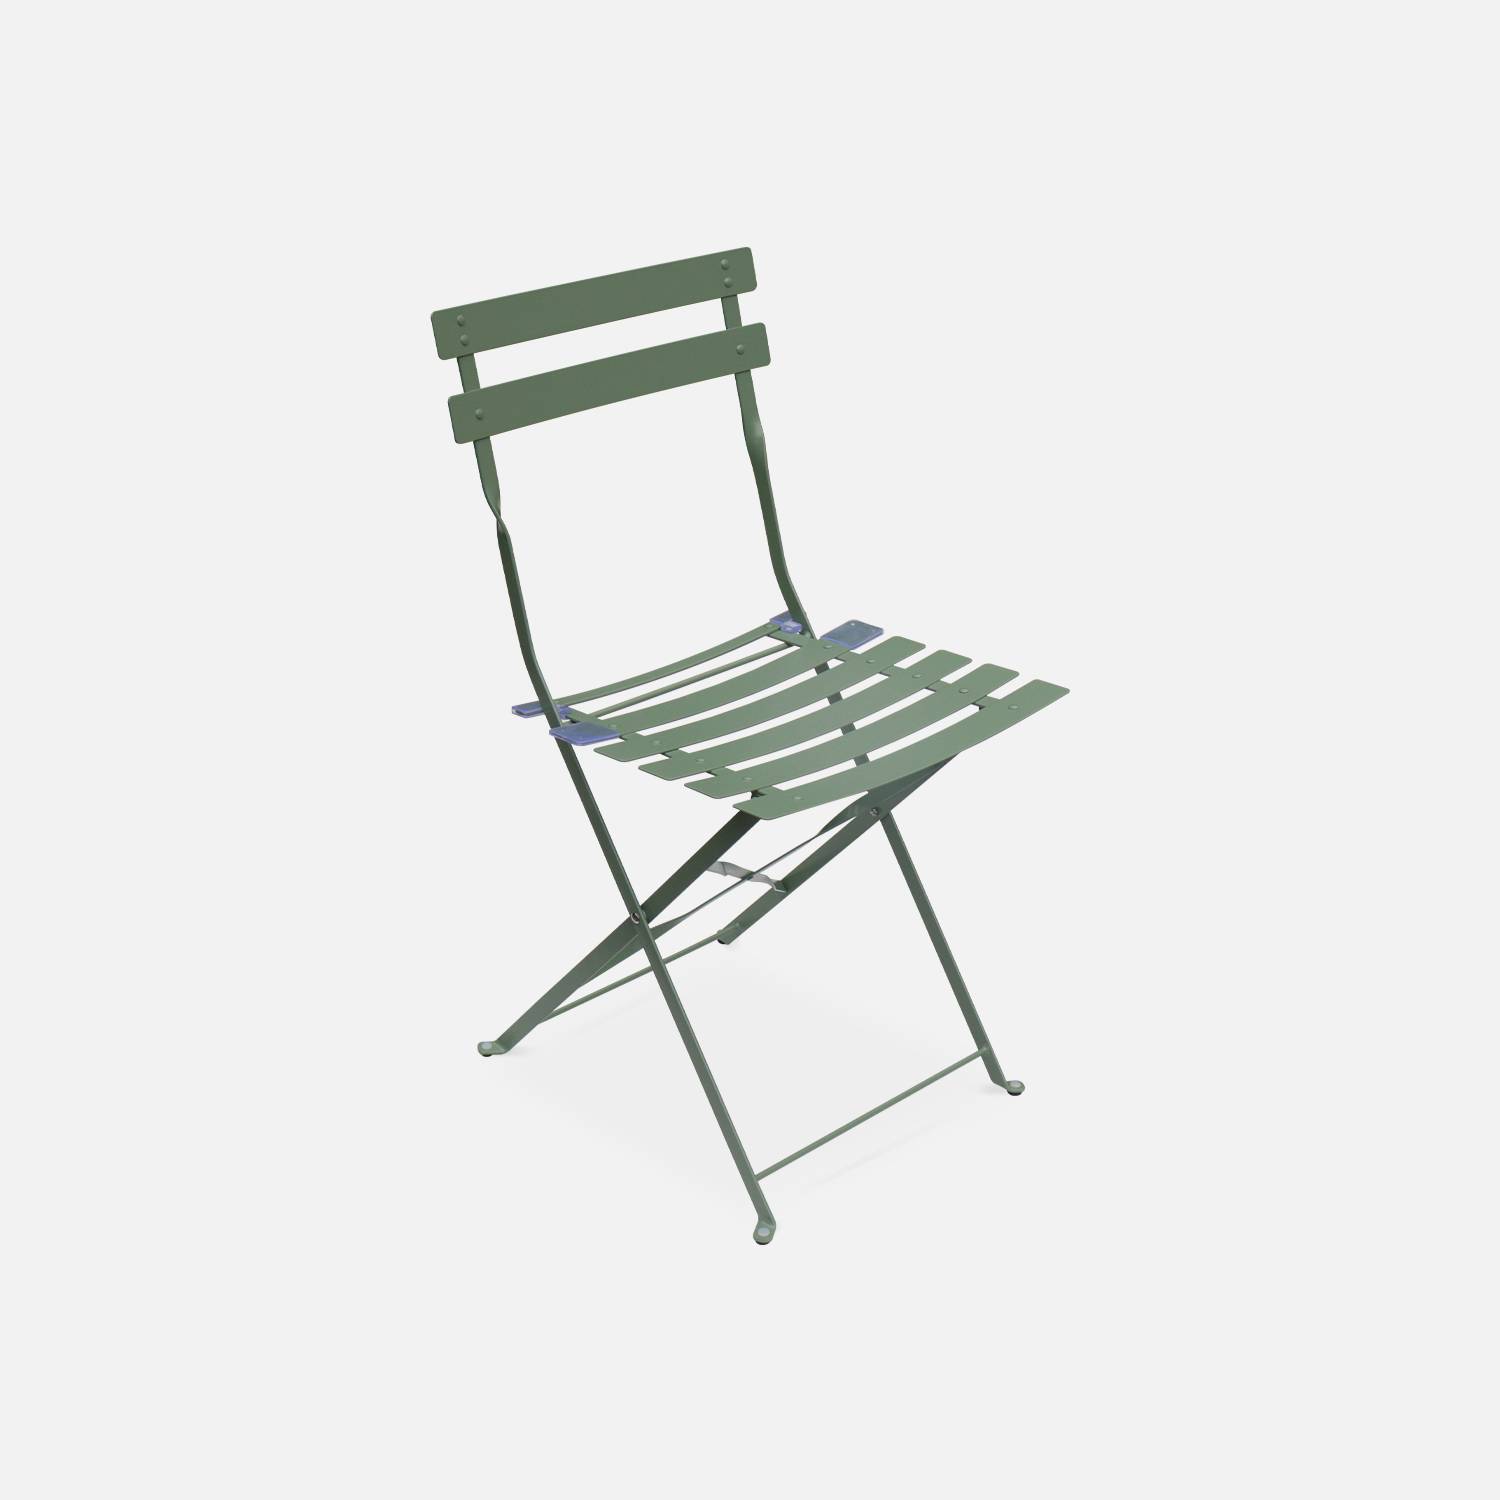 2-seater foldable thermo-lacquered steel bistro garden table with chairs, 70x70cm - Emilia - Sage geen,sweeek,Photo4